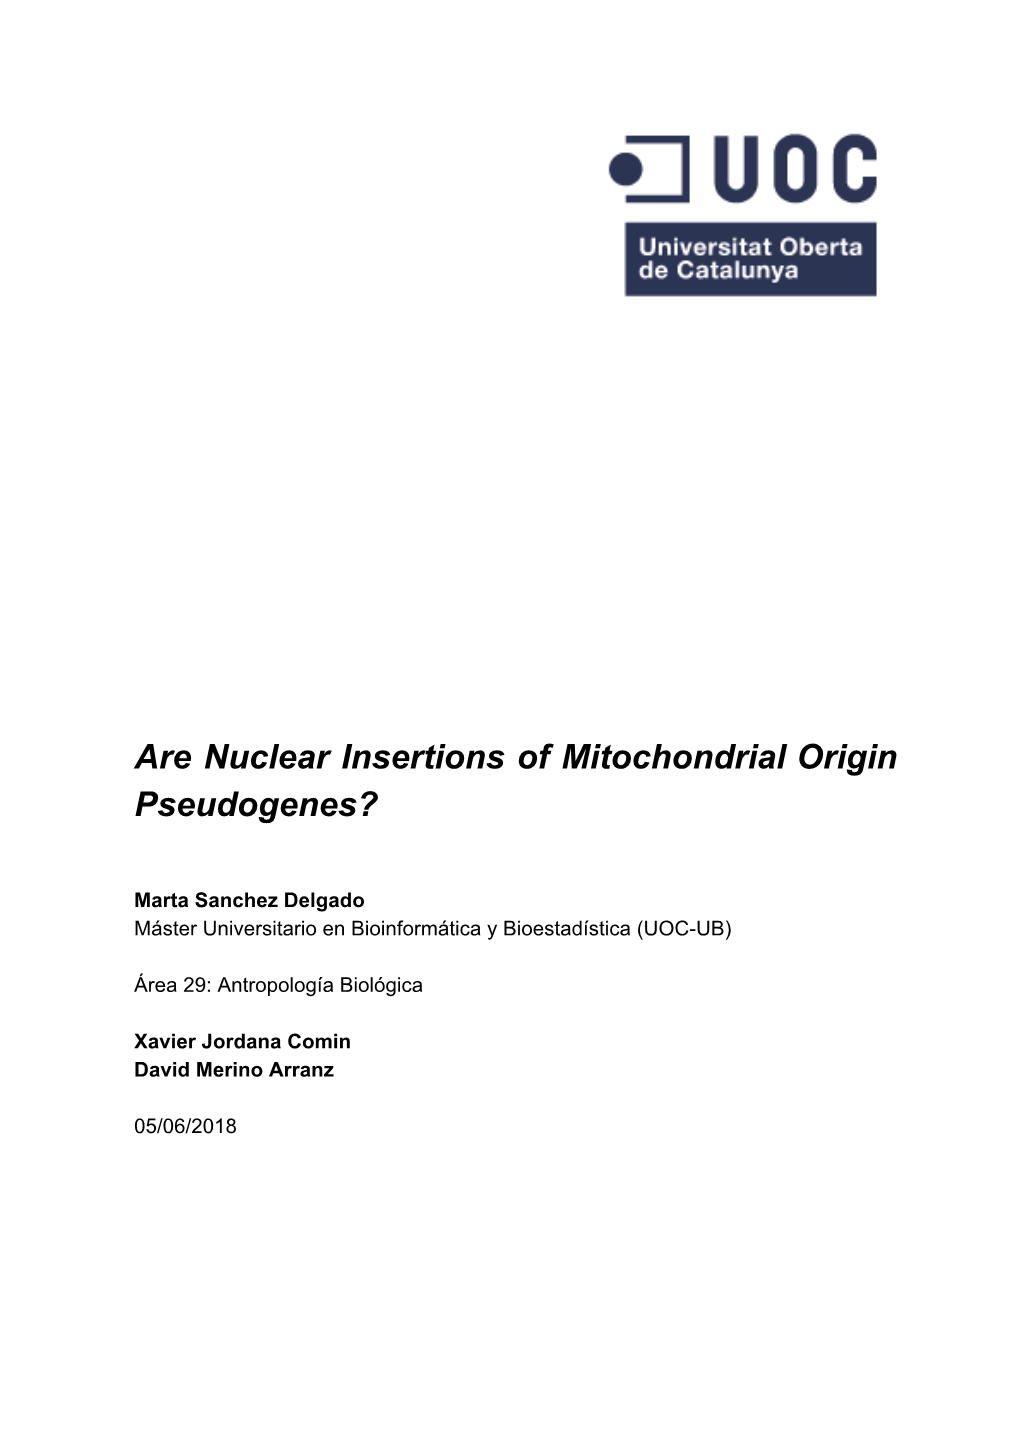 Are Nuclear Insertions of Mitochondrial Origin Pseudogenes?